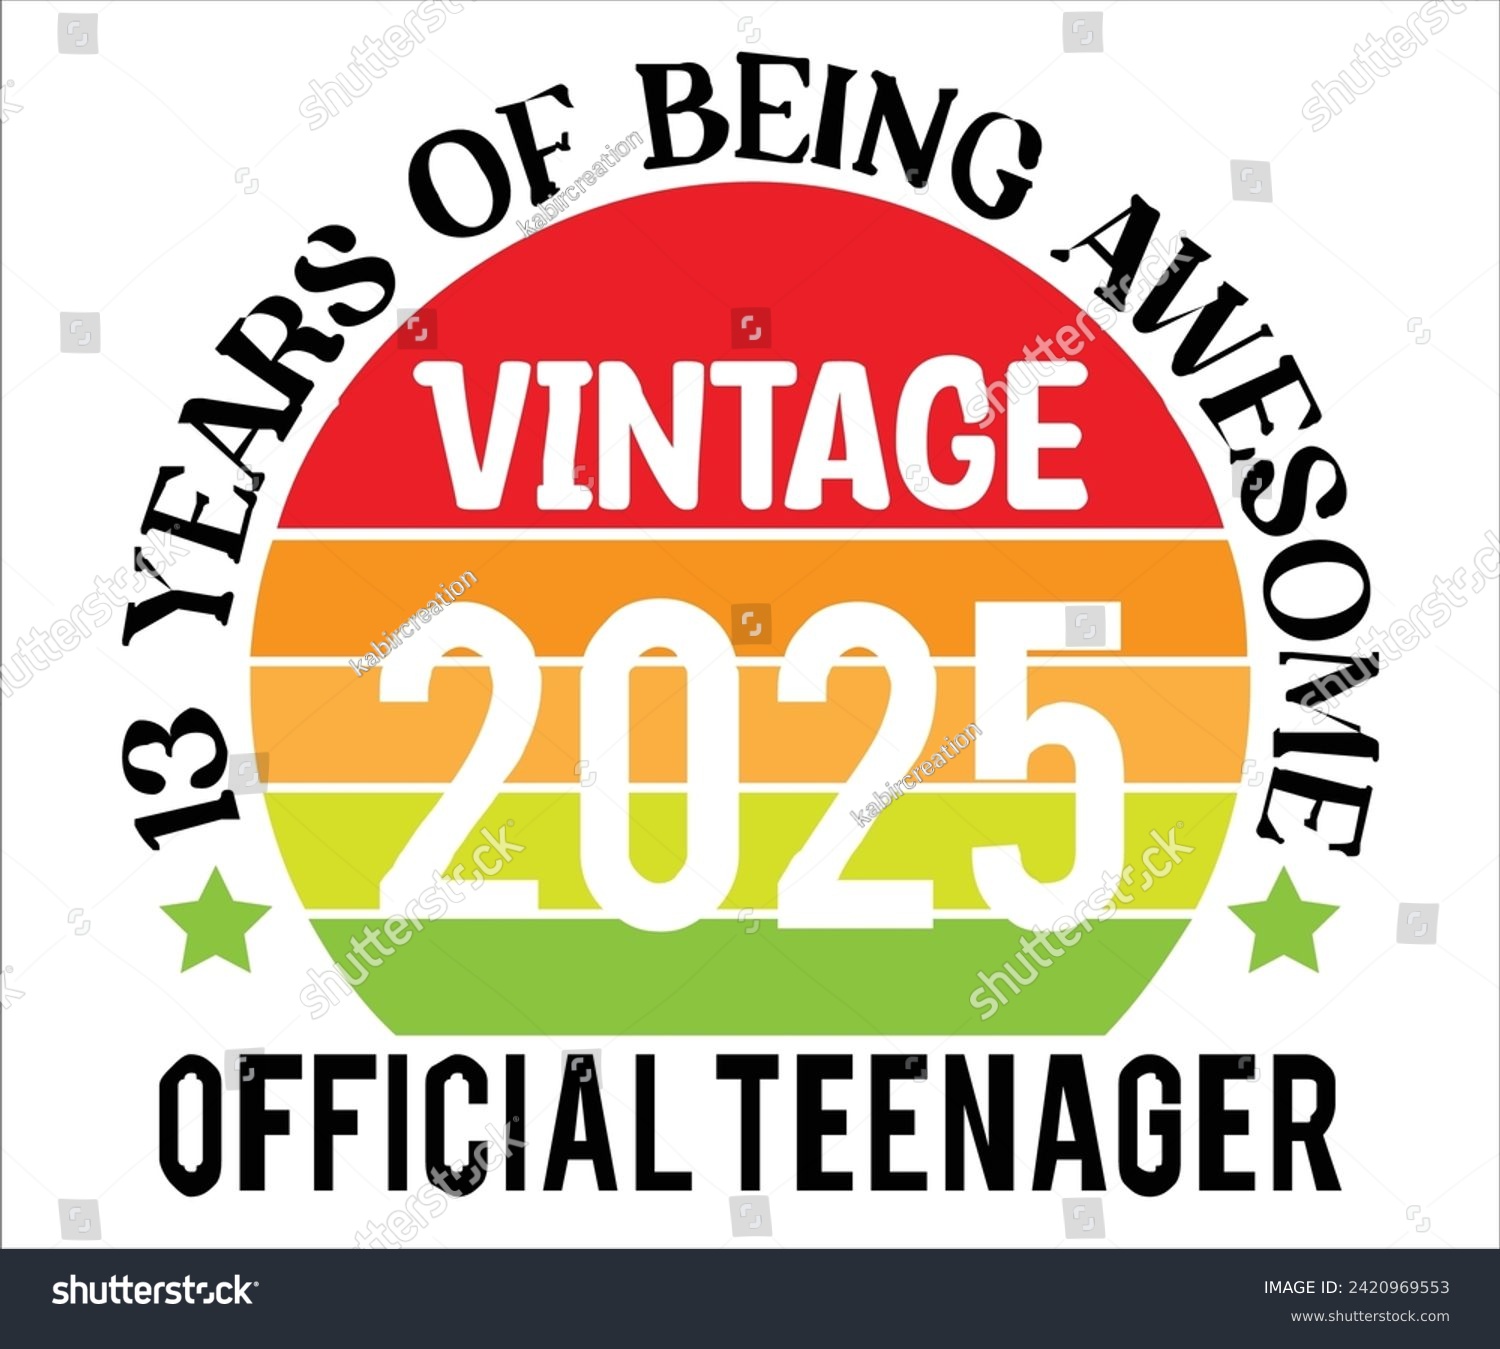 SVG of 13 Years Of Being Wesome 2025 Official Teenager T-shirt,100 Day School Svg,100 Day School T-shirt, welcome Back To, School Day, 100 Days Of School Shirt Boy, 100 Days Shirt svg